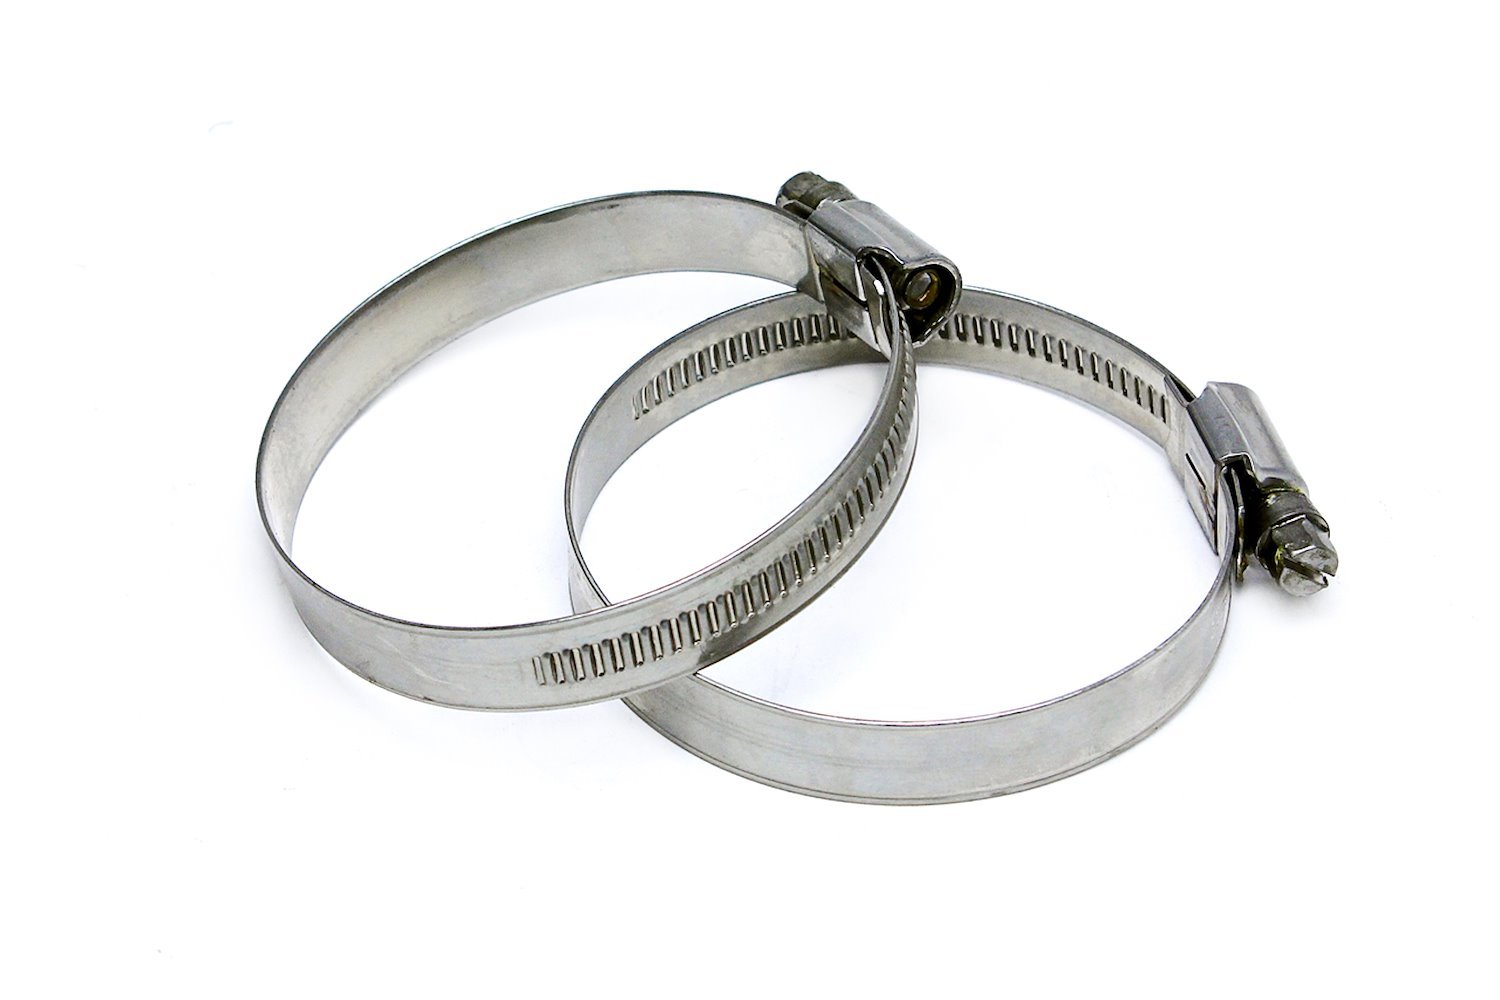 EMSC-100-120x2 Embossed Hose Clamp, Stainless Steel Embossed Hose Clamp, Size #64, Effective Range: 4 in.- 4-1/2 in., 2Pc